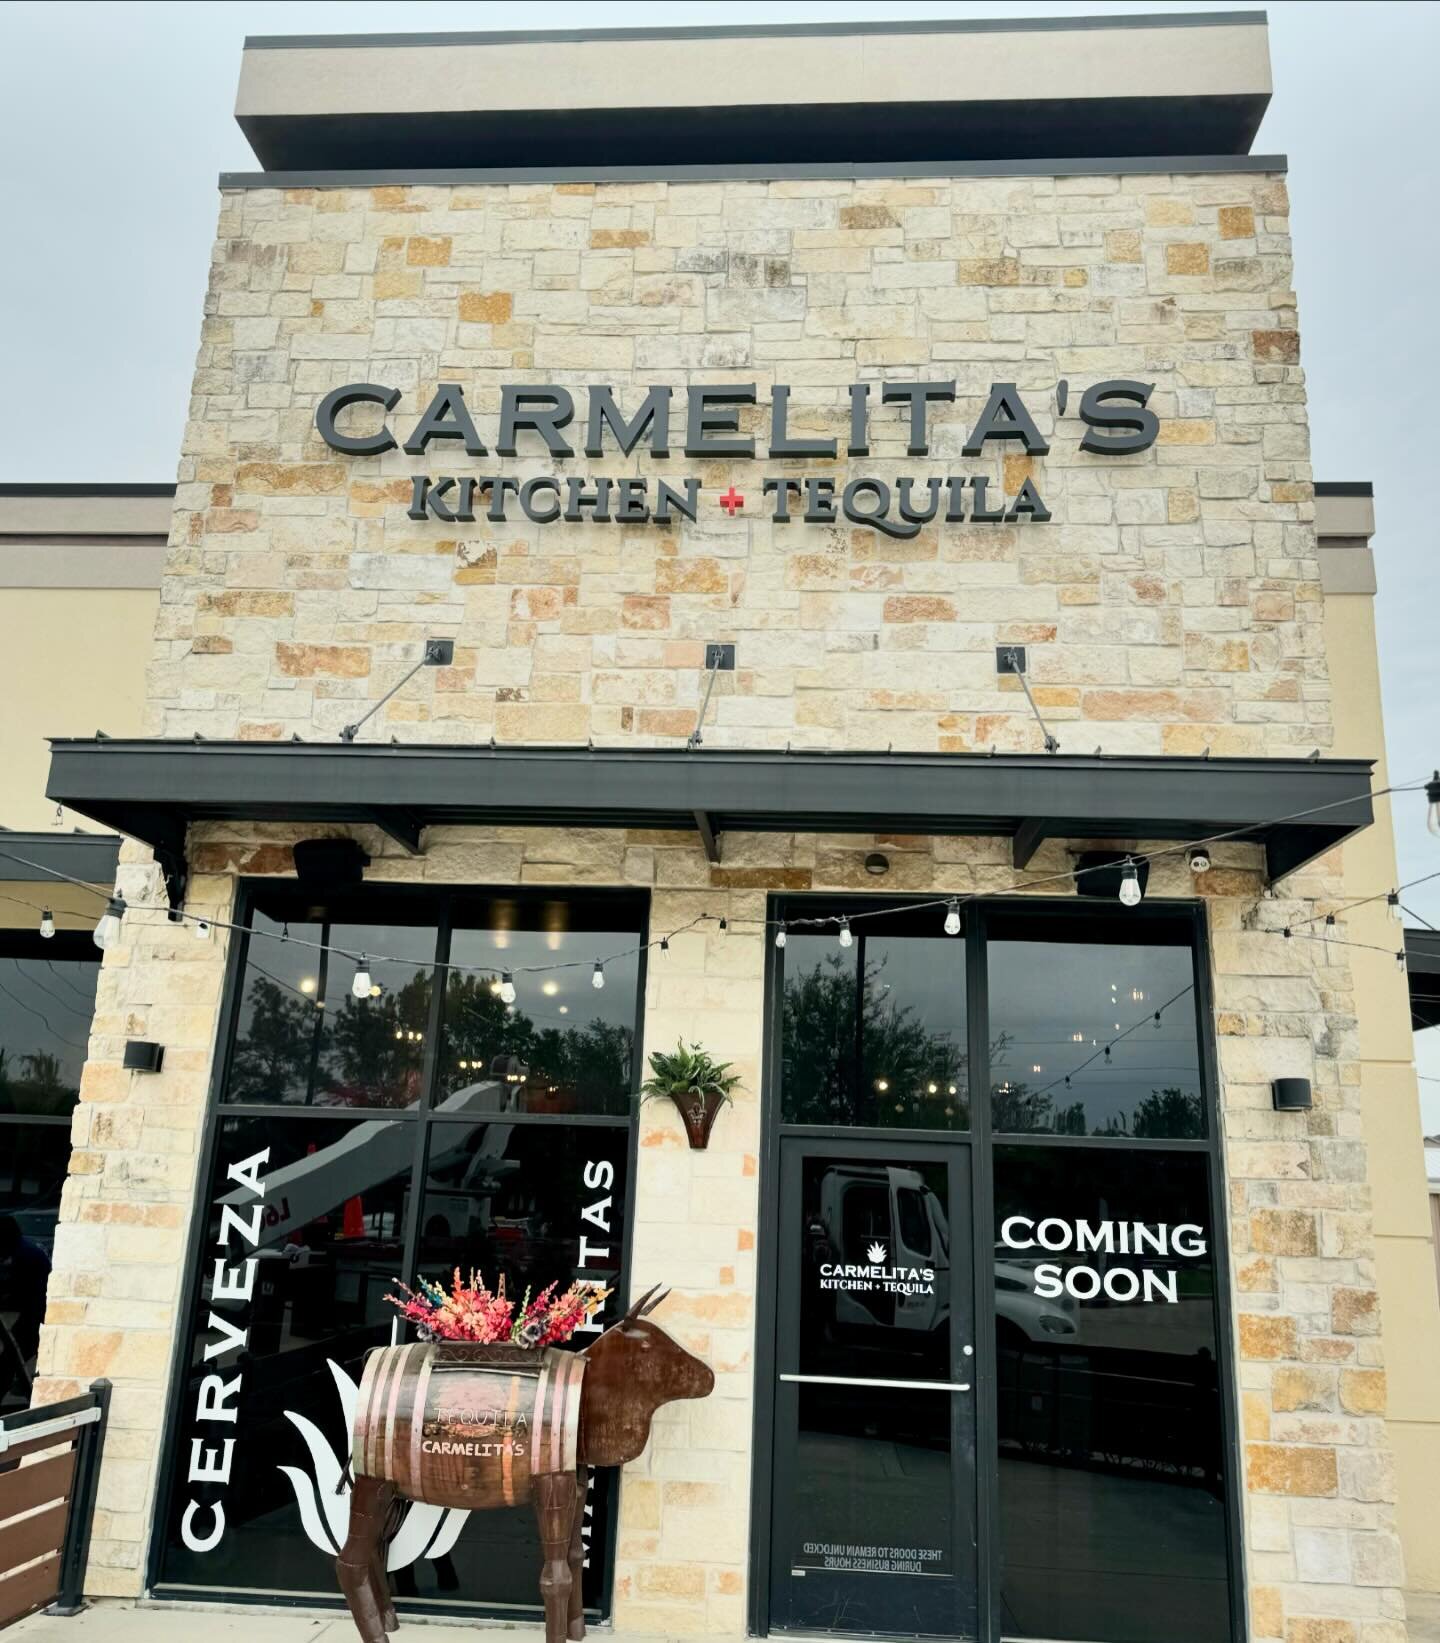 ✅Our sign has been installed, the finish line is around the corner, inspections are our very last step 😊
#houstonrestaurants
#houstonmexicanfood
#cypresstx 
#cypresstexas
#texasrestaurant 
#houstonbars 
#texasbars
#houstontequila 
#communityimpact